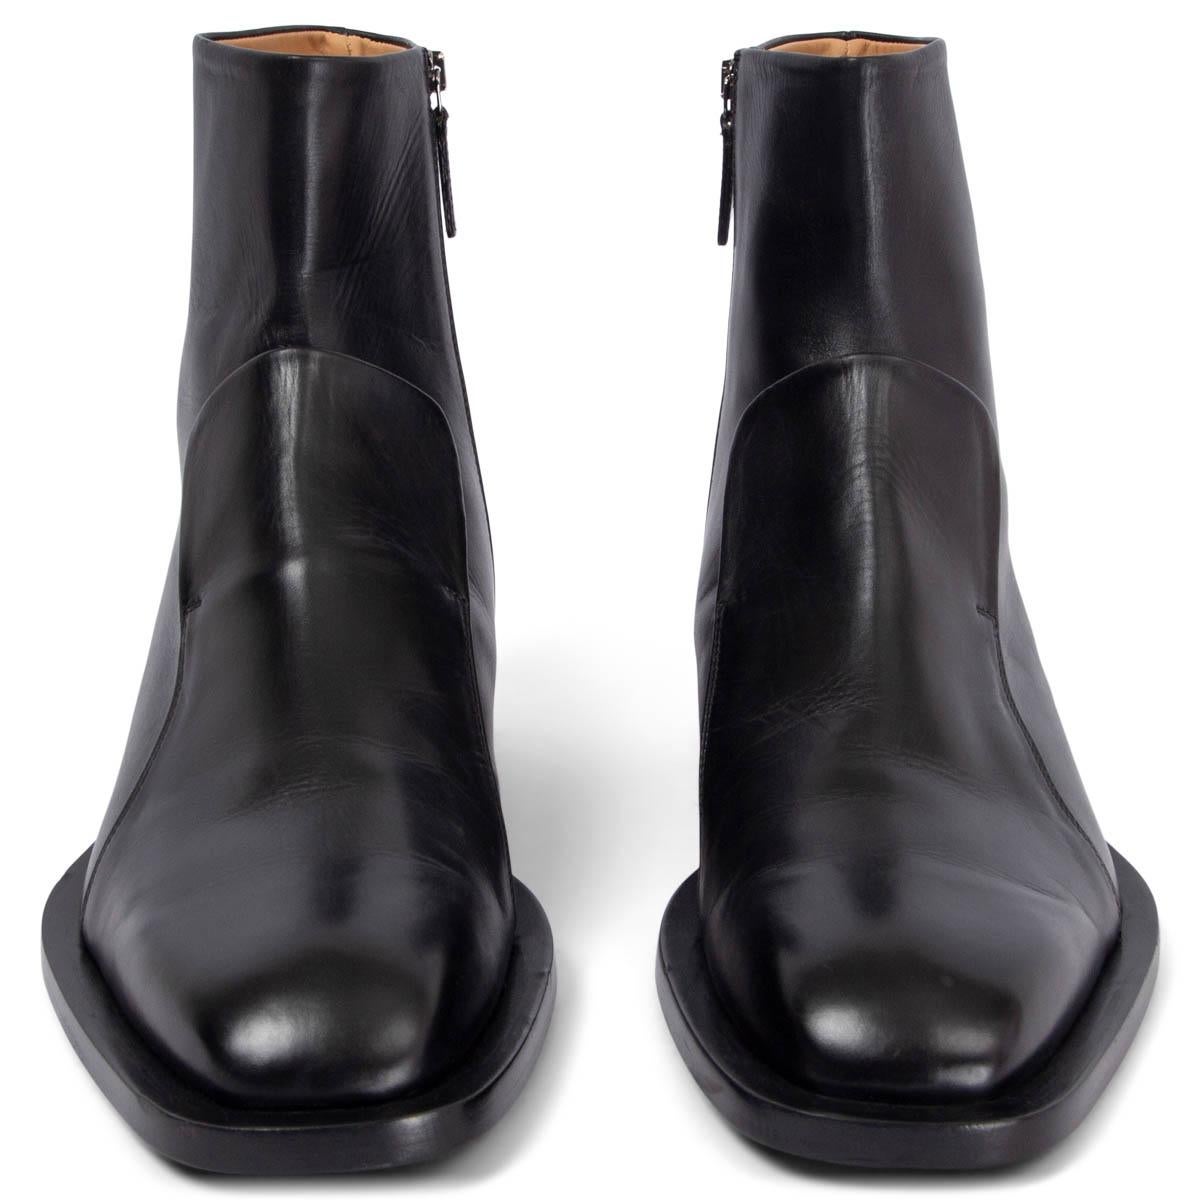 100% authentic Jil Sander chelsea boots made from smooth Nappa leather with a sculptural front panel and a practical side zip leading to a tan-brown interior. Have been worn once inside and are in virtually new condition. 

Measurements
Imprinted